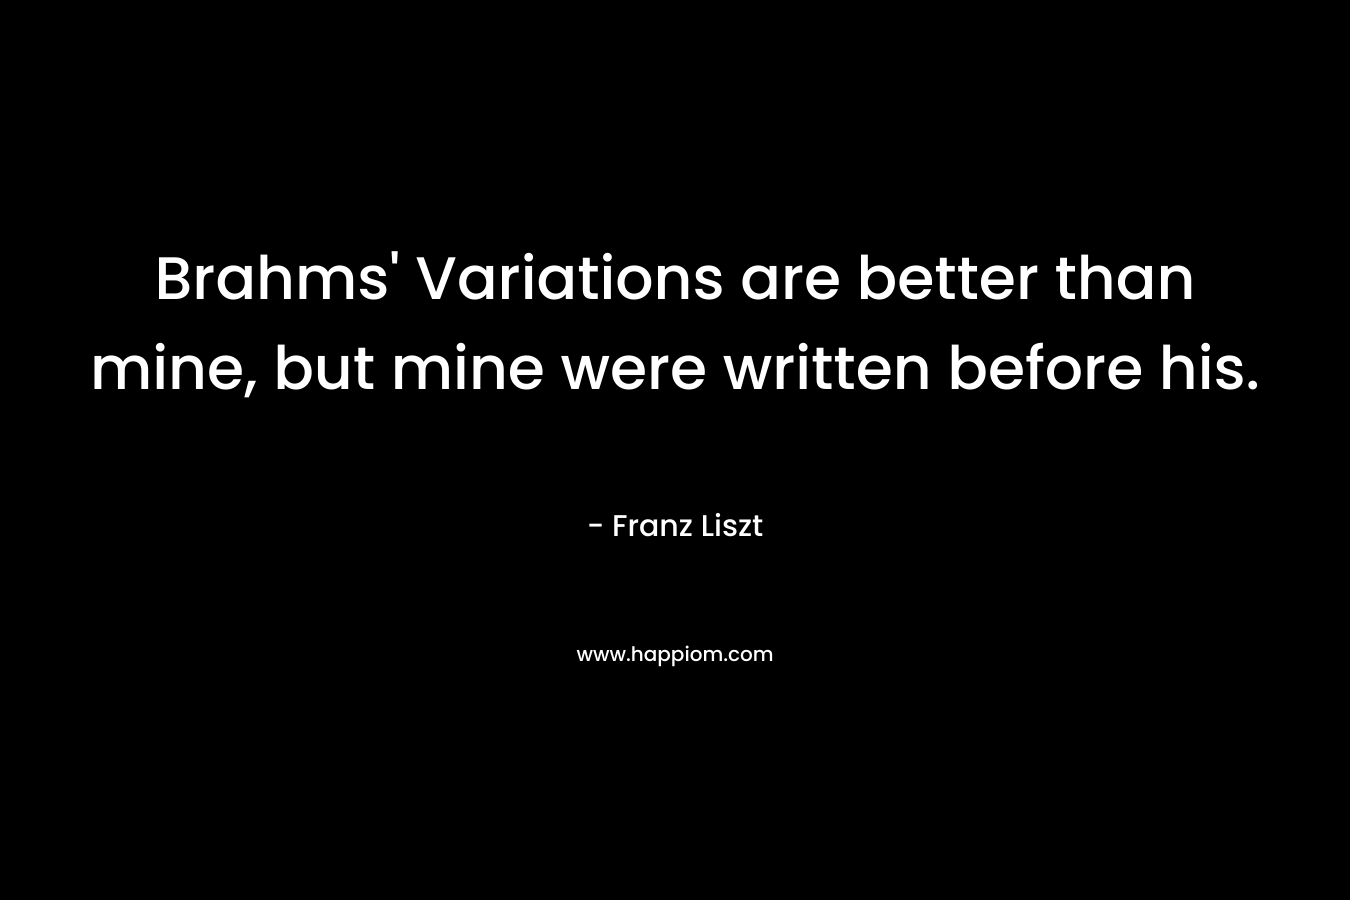 Brahms’ Variations are better than mine, but mine were written before his. – Franz Liszt